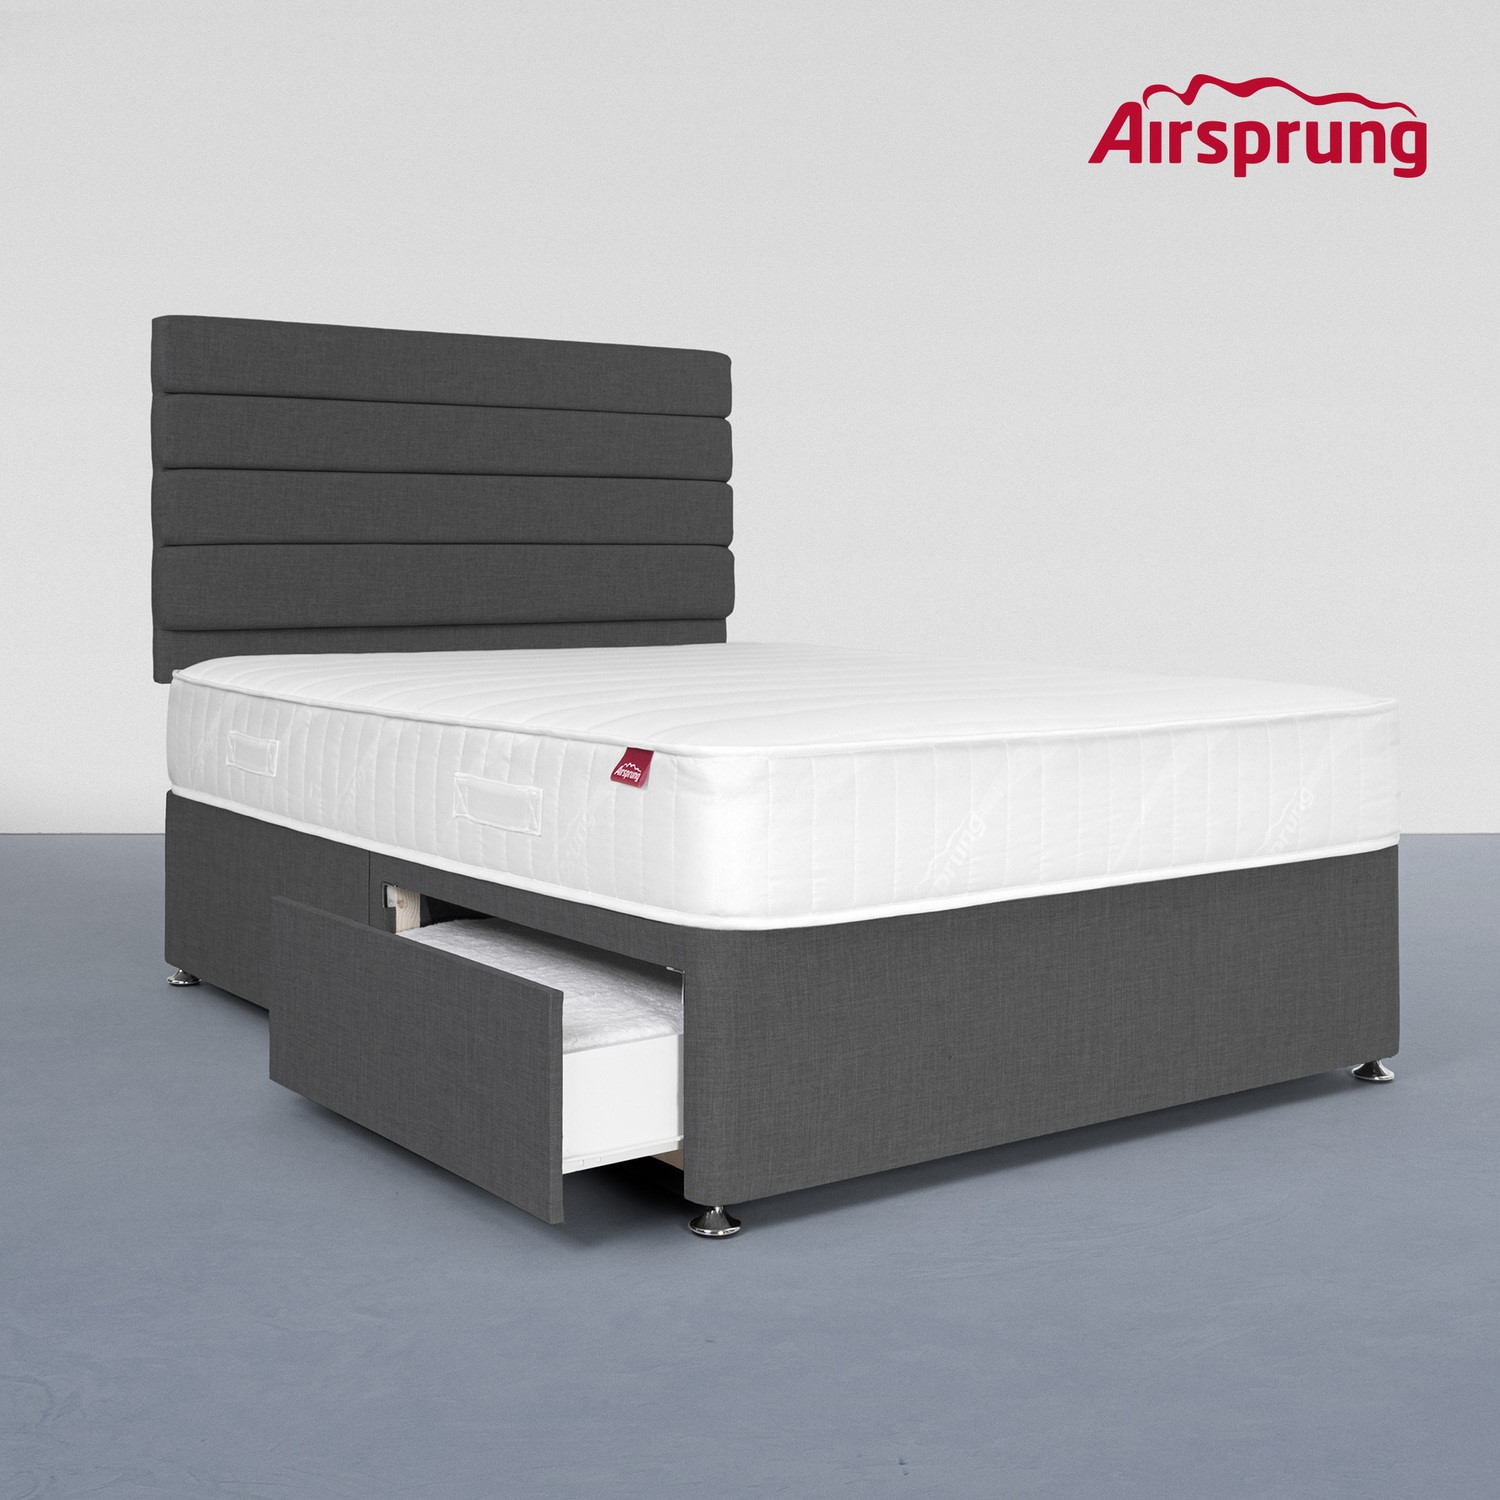 Read more about Airsprung small double 2 drawer divan bed with comfort mattress charcoal